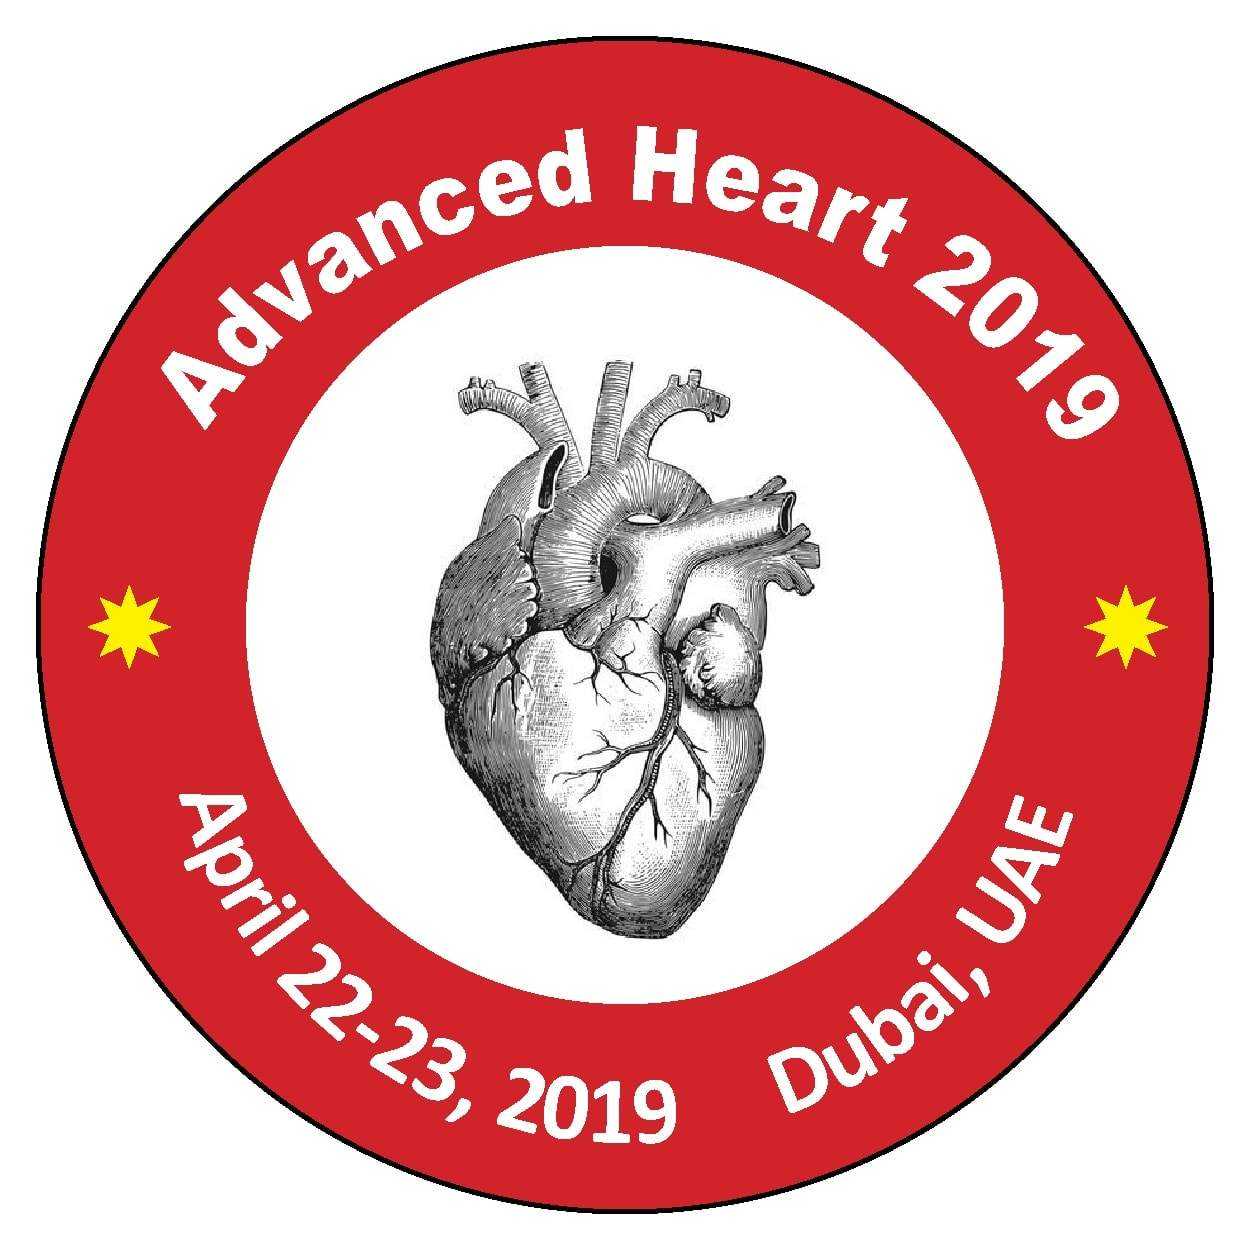 Photos of 4th International Heart Conference (Advanced Heart 2018)